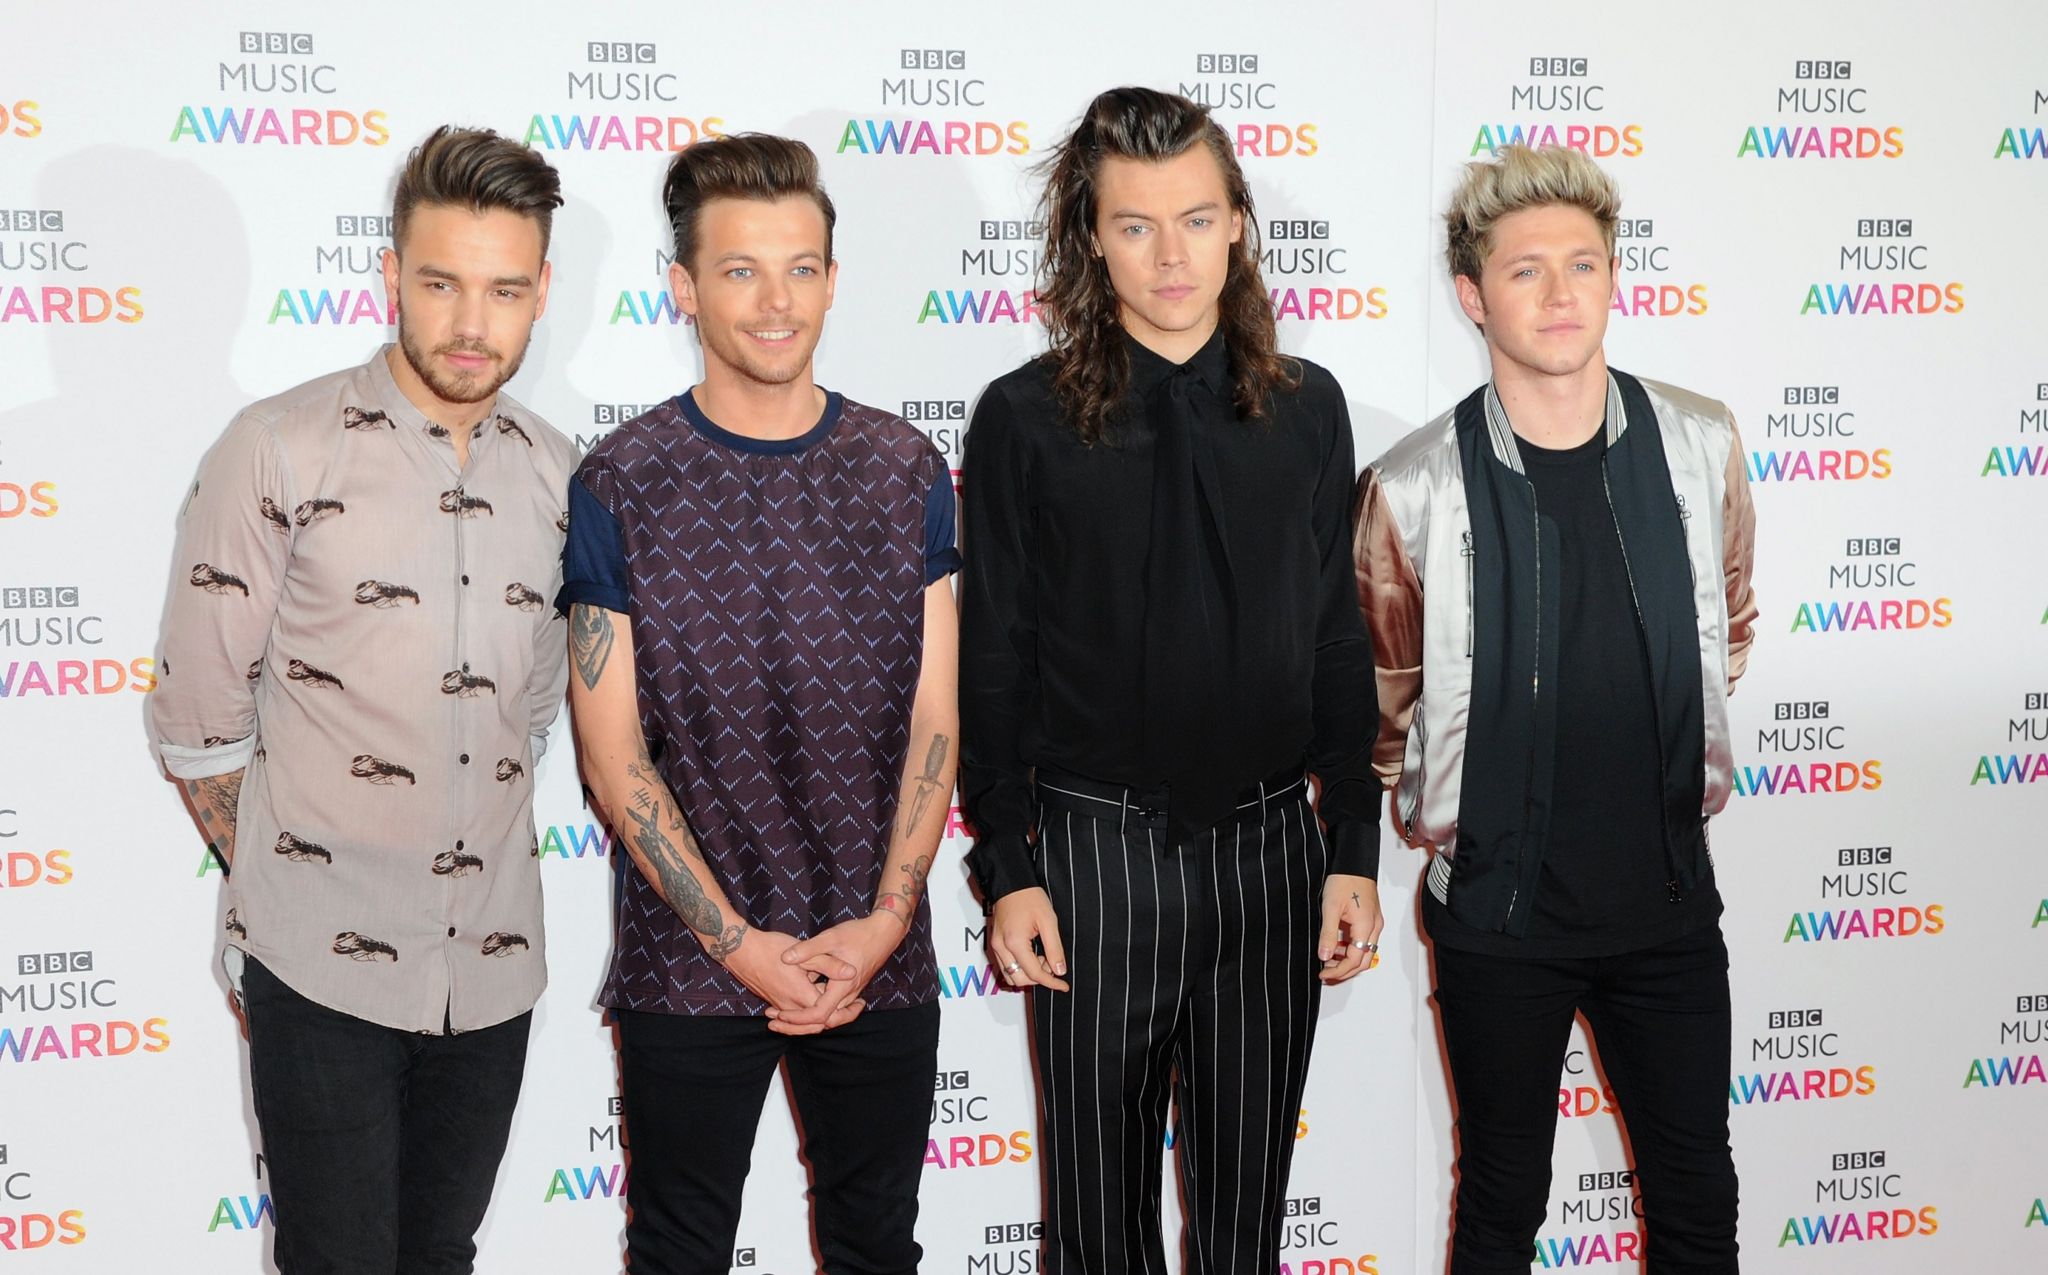 One Direction at the BBC Music Awards